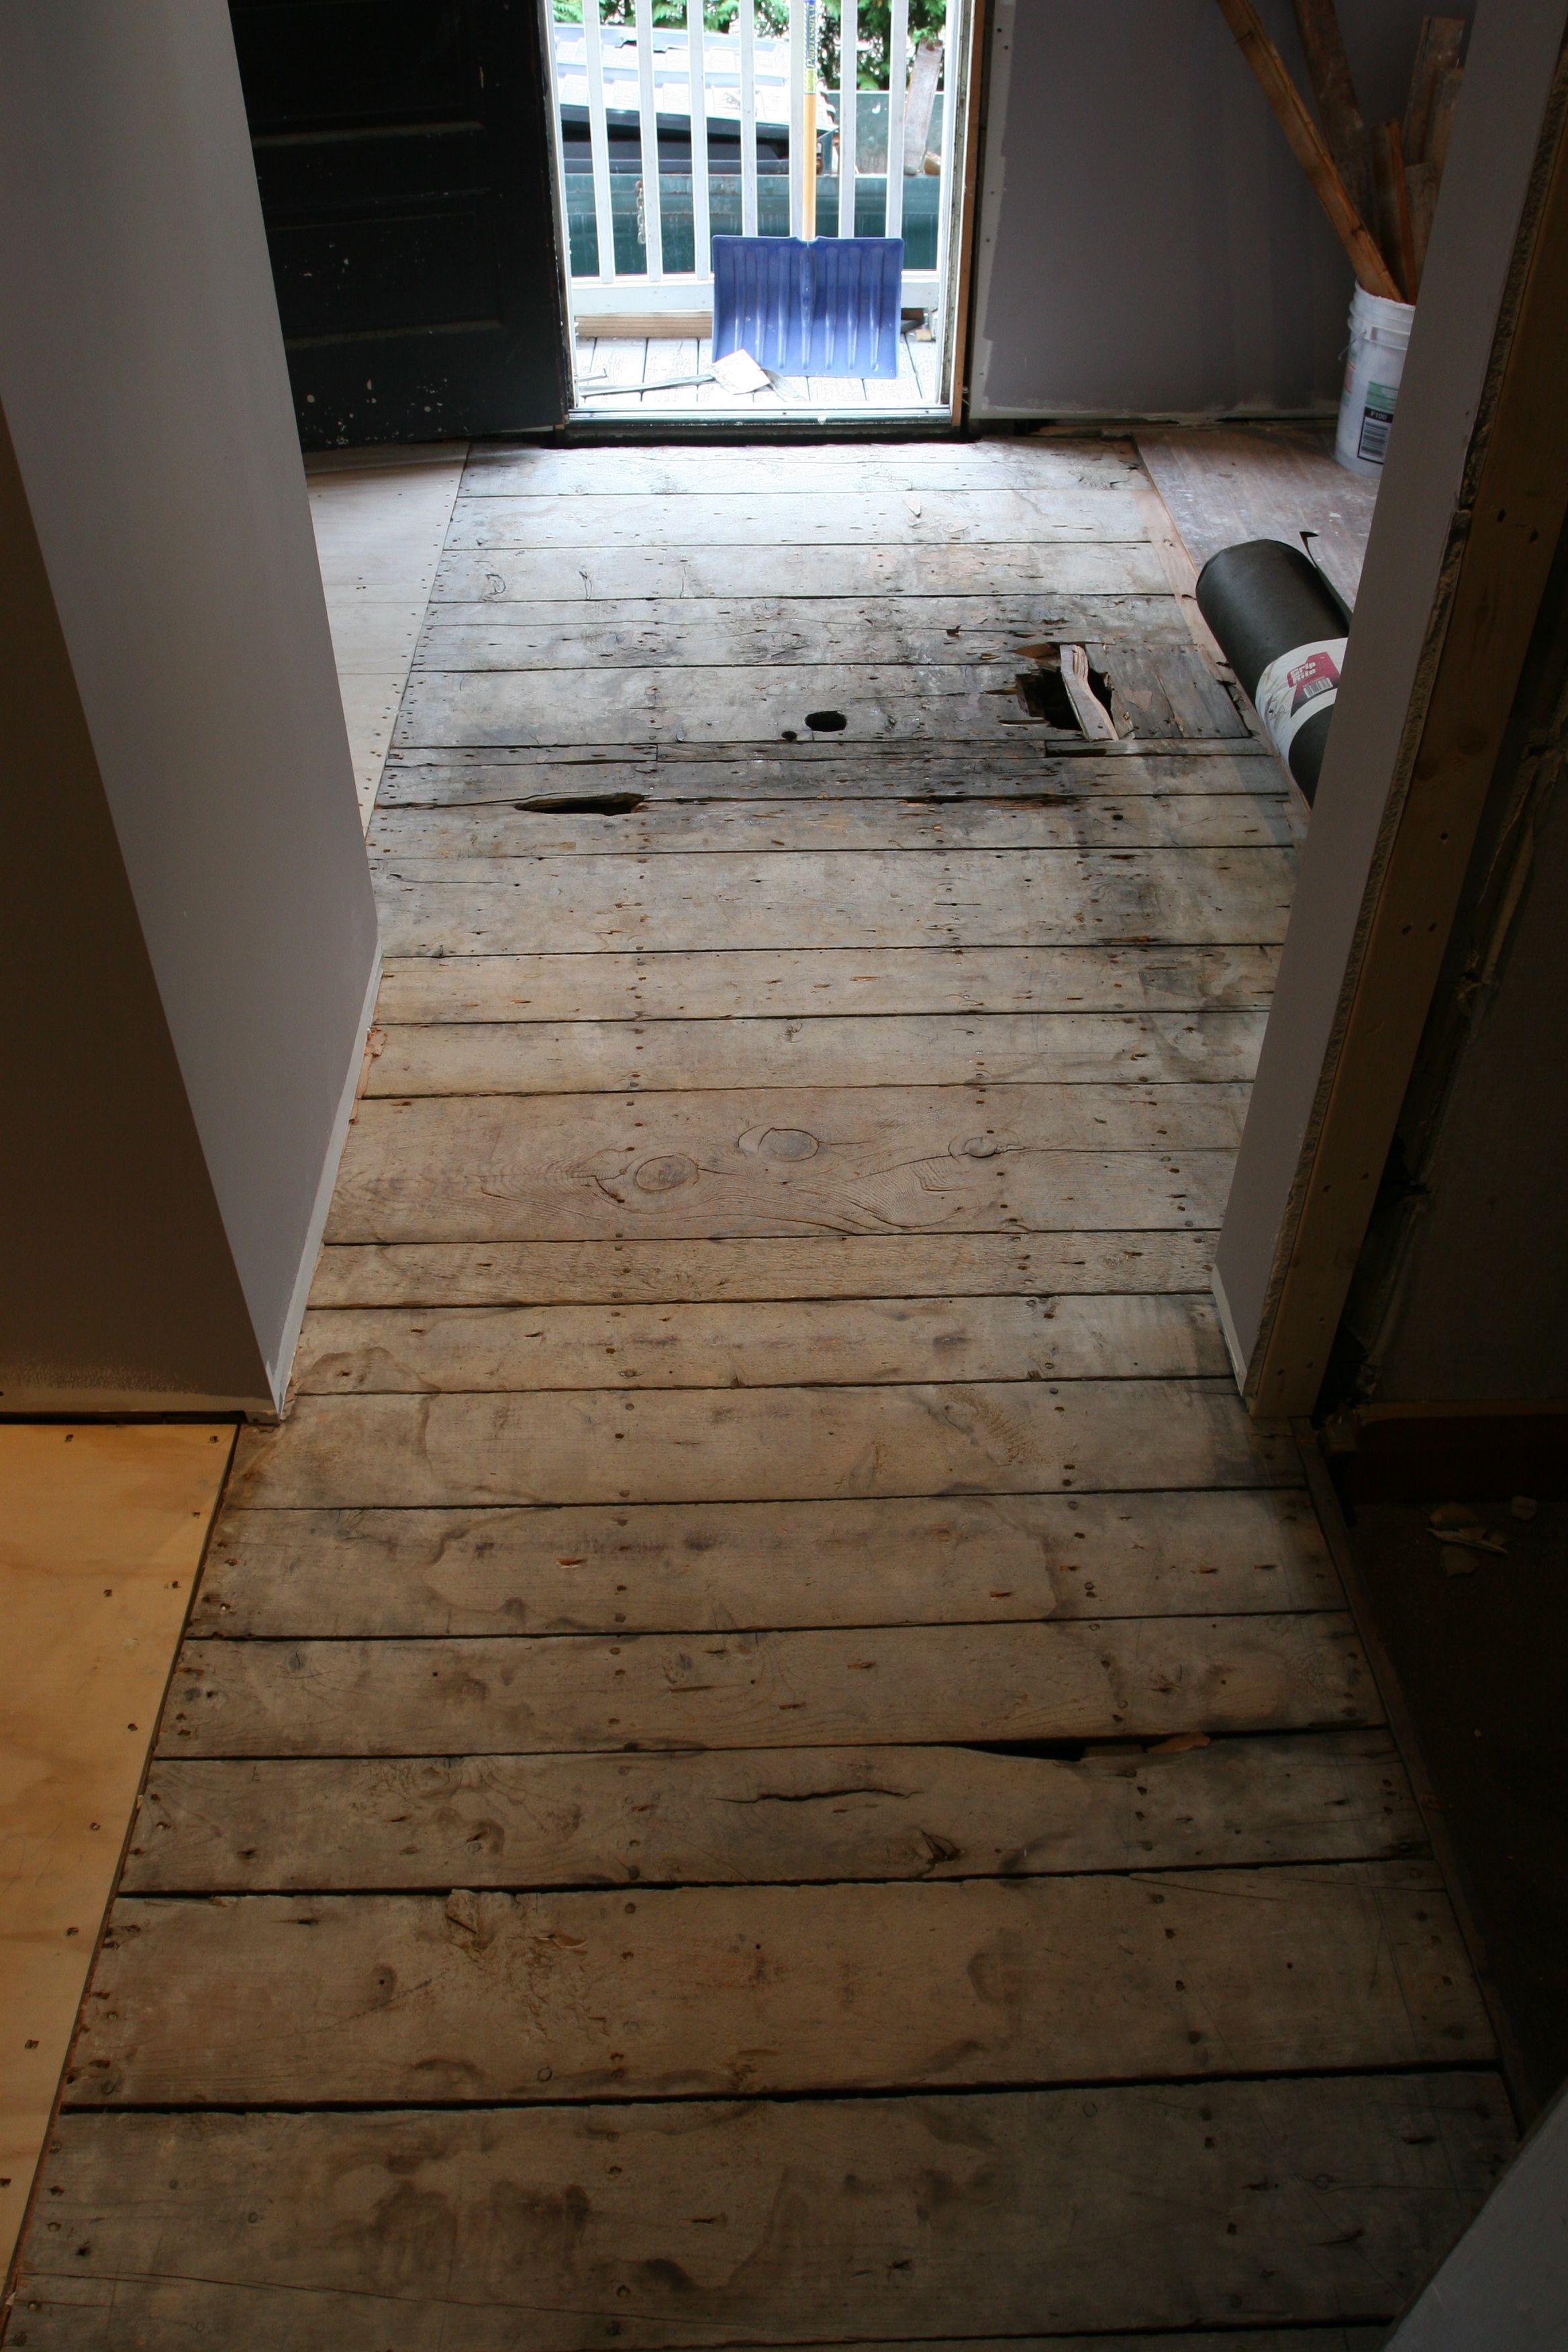 Eric prepared the floor by removing some of the old wood (patched from eons ago) and re-nailing down the subfloor.